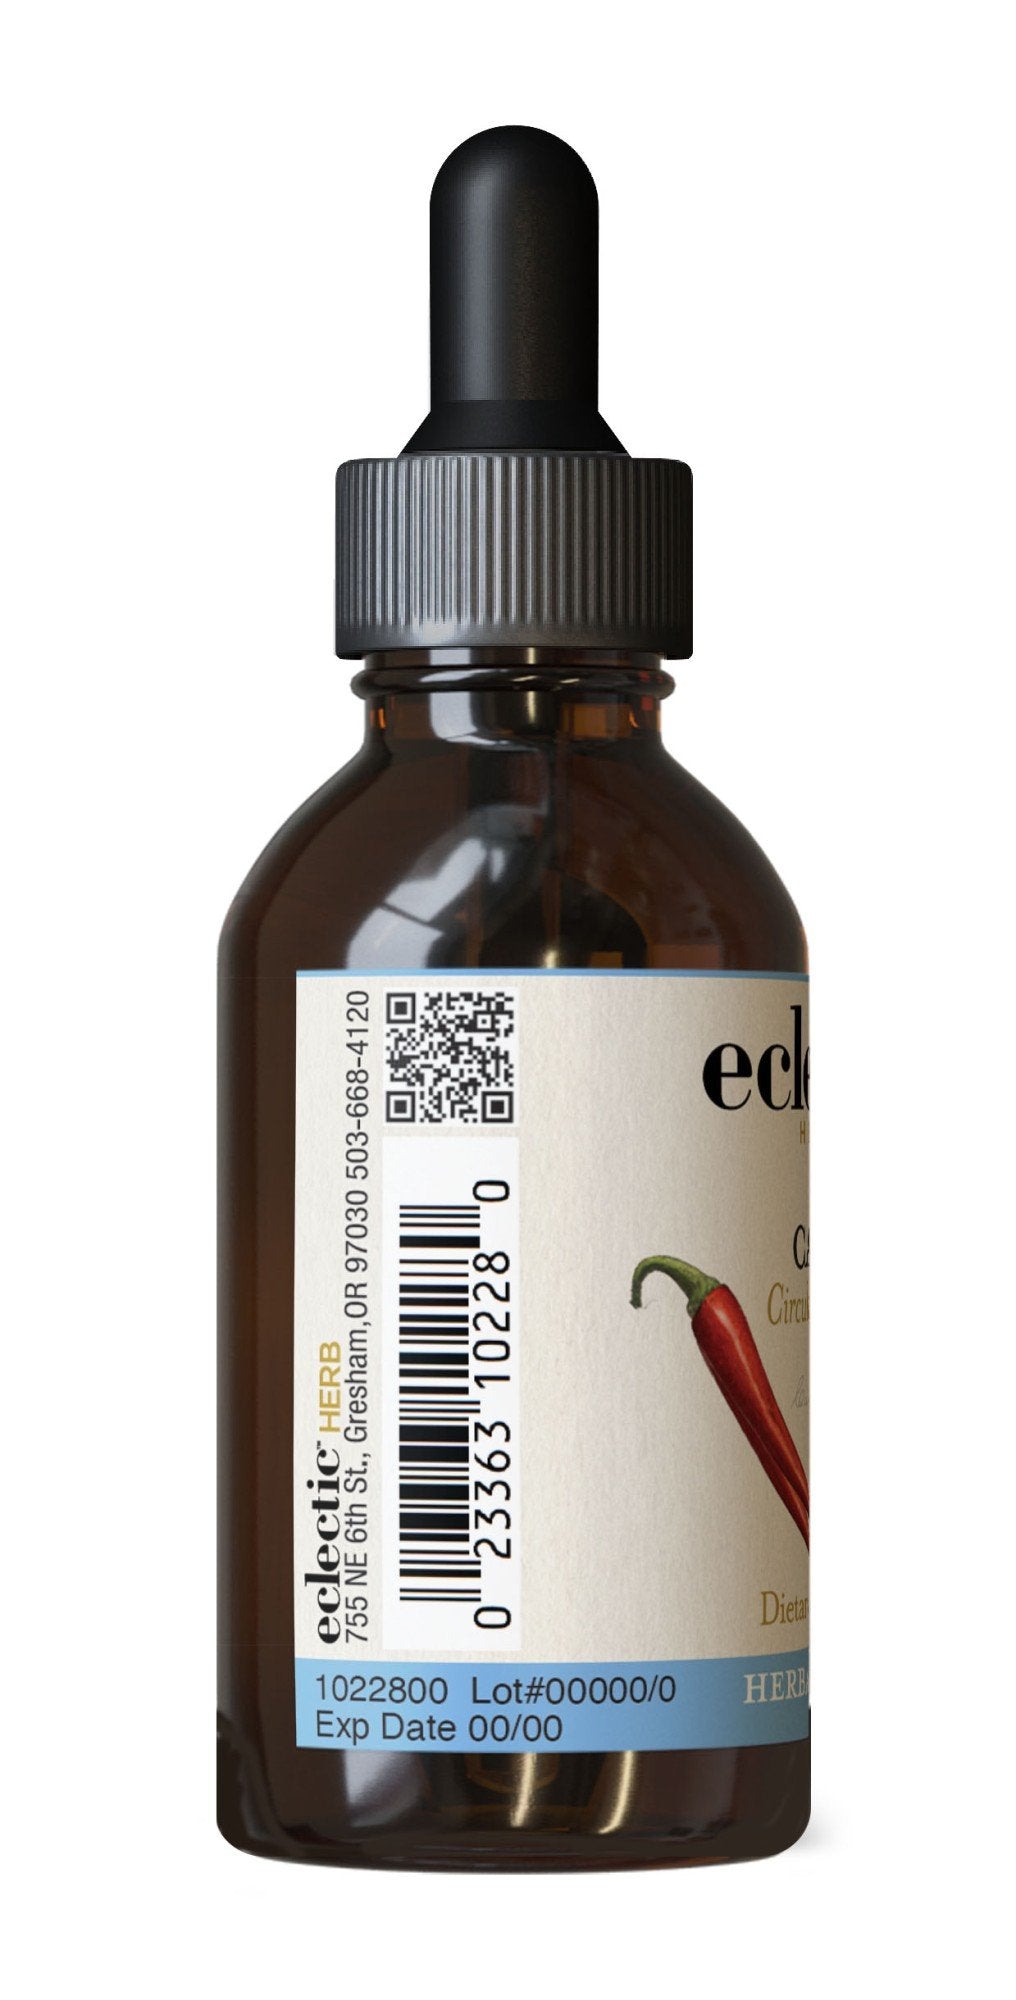 Eclectic Herb Cayenne Extract 2 oz Liquid